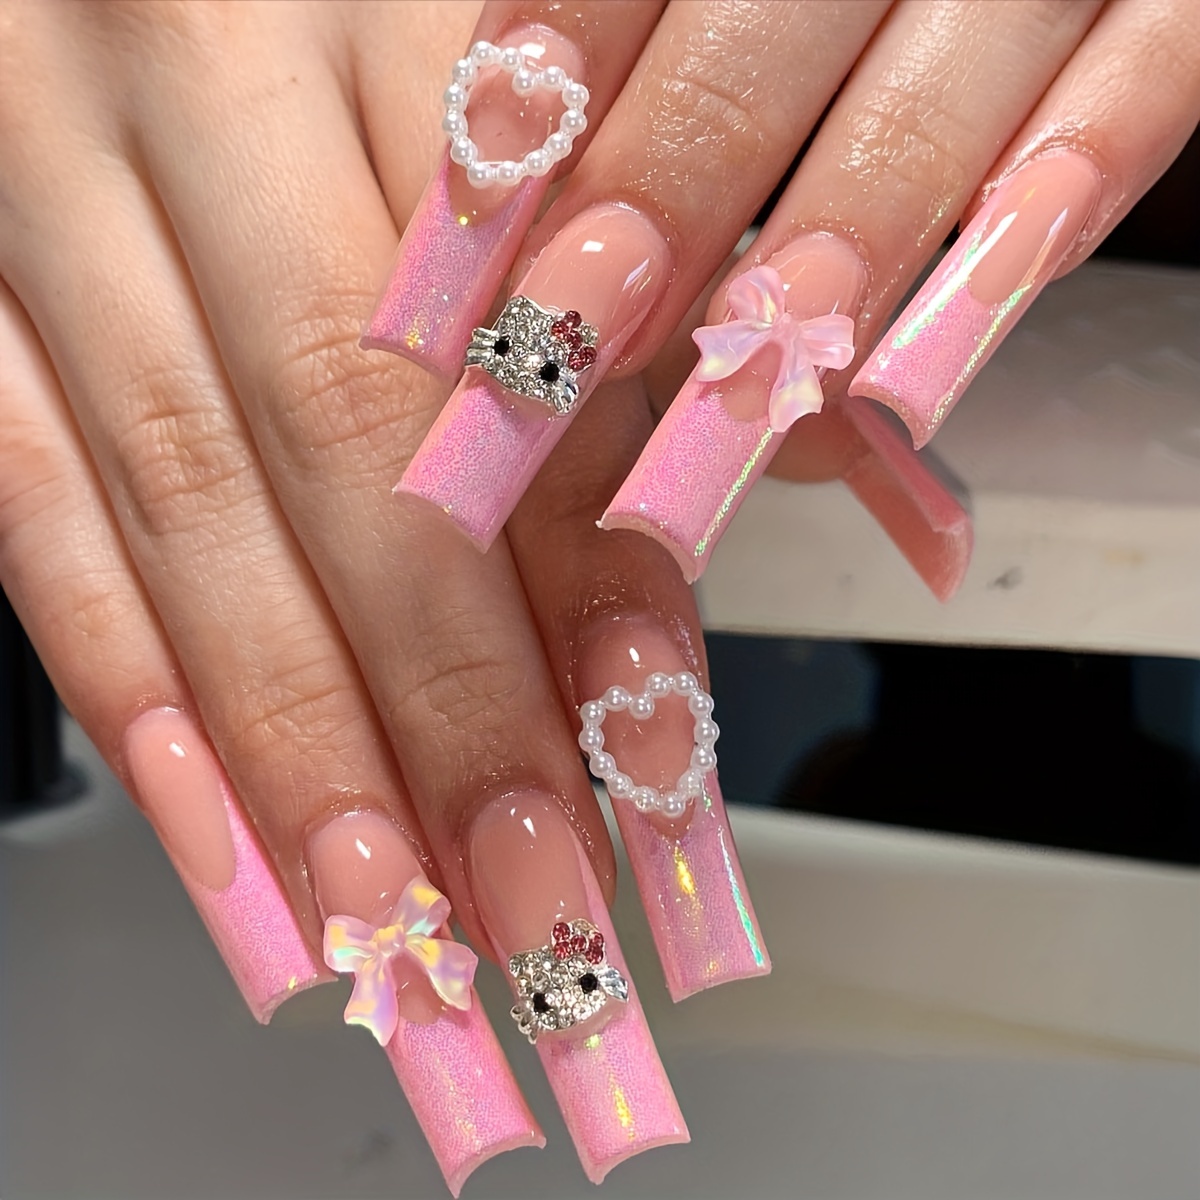 

24pcs Glossy Long Ballerina Fake Nails, Pinkish Glitter French Tip Press On Nails With 3d Rhinestone Cat, Bow And Heart Pearl Design, Sweet Cool Y2k False Nails For Women Girls